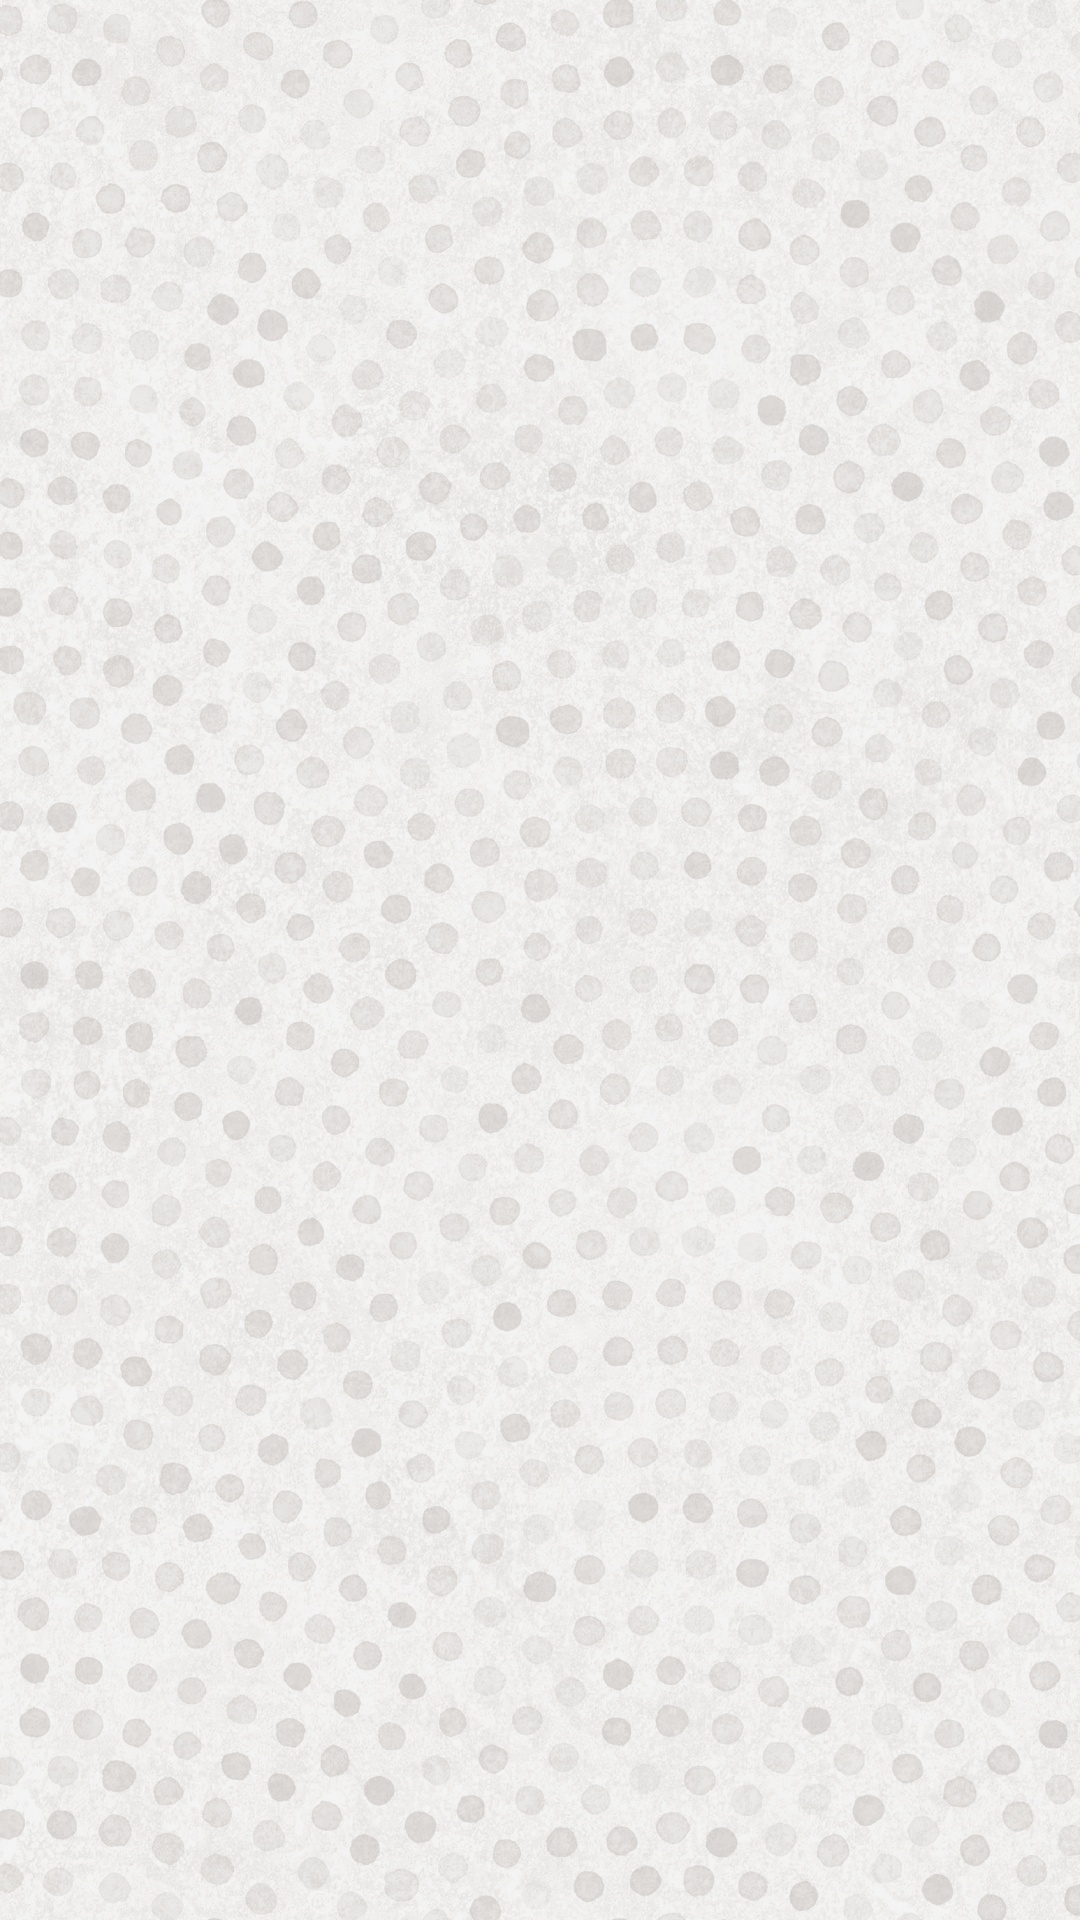 White and Black Polka Dot Textile. Wallpaper in 1080x1920 Resolution